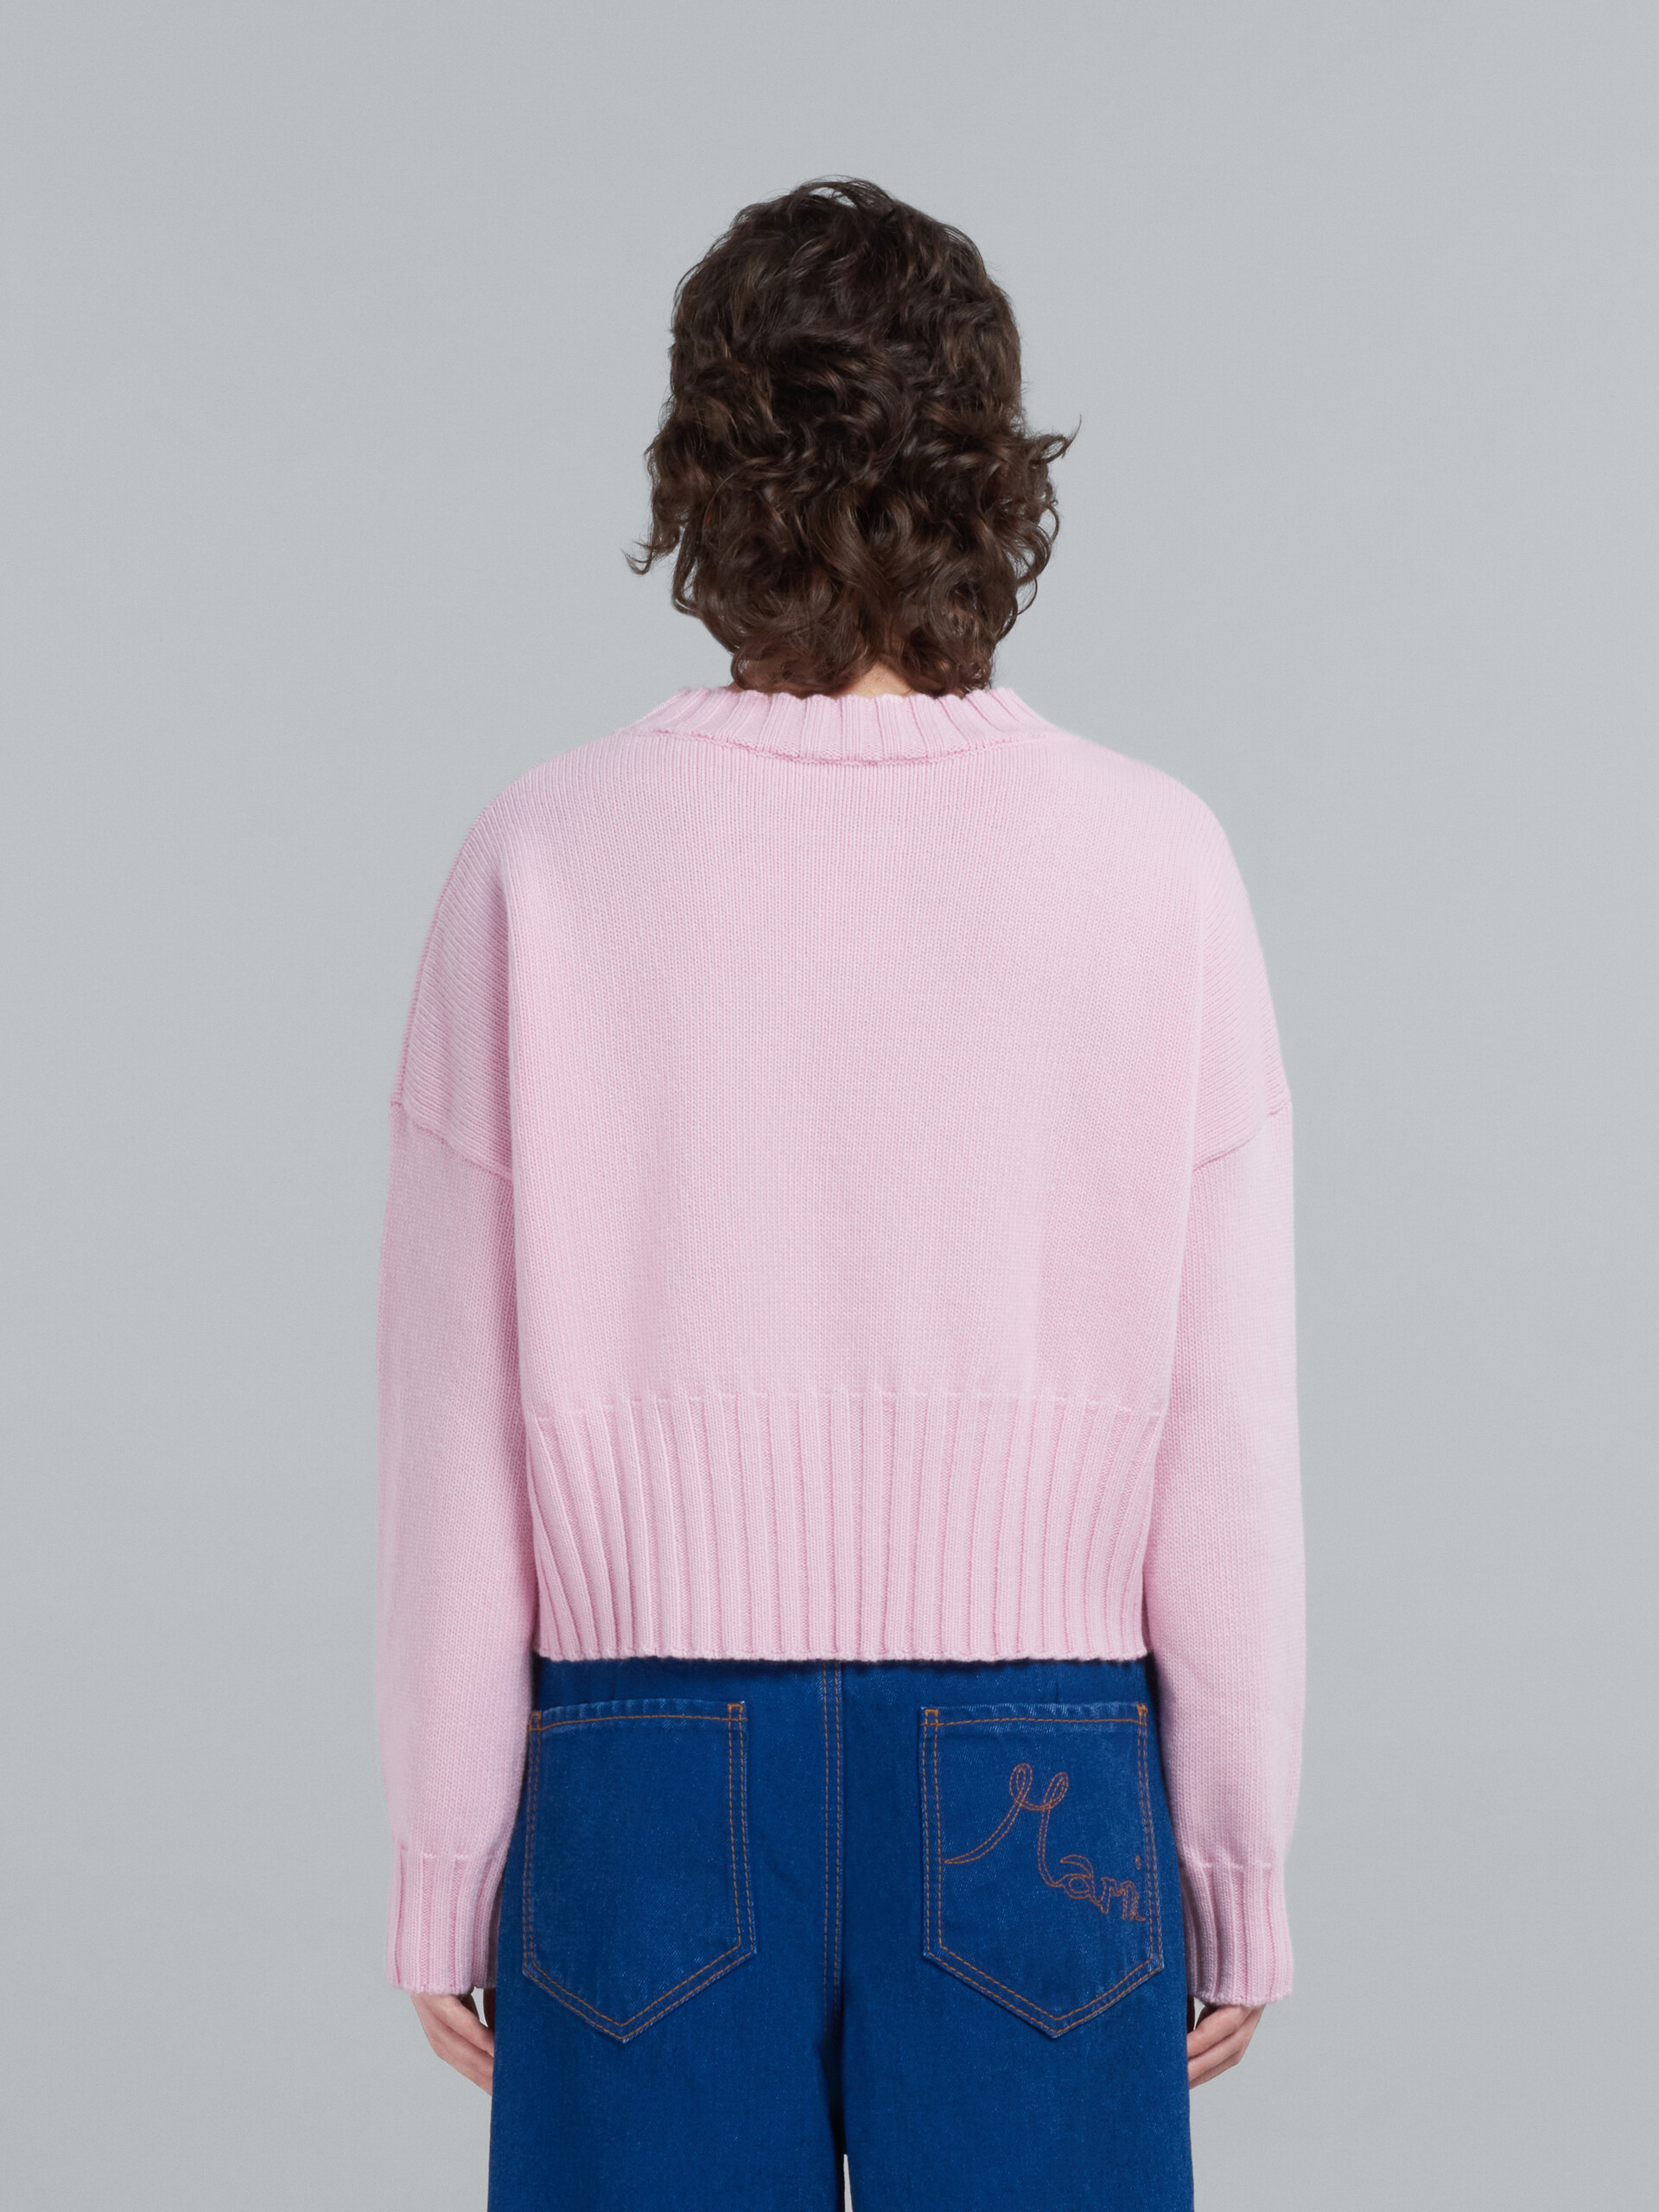 Sweater with rabbit embroidery - Pullovers - Image 3